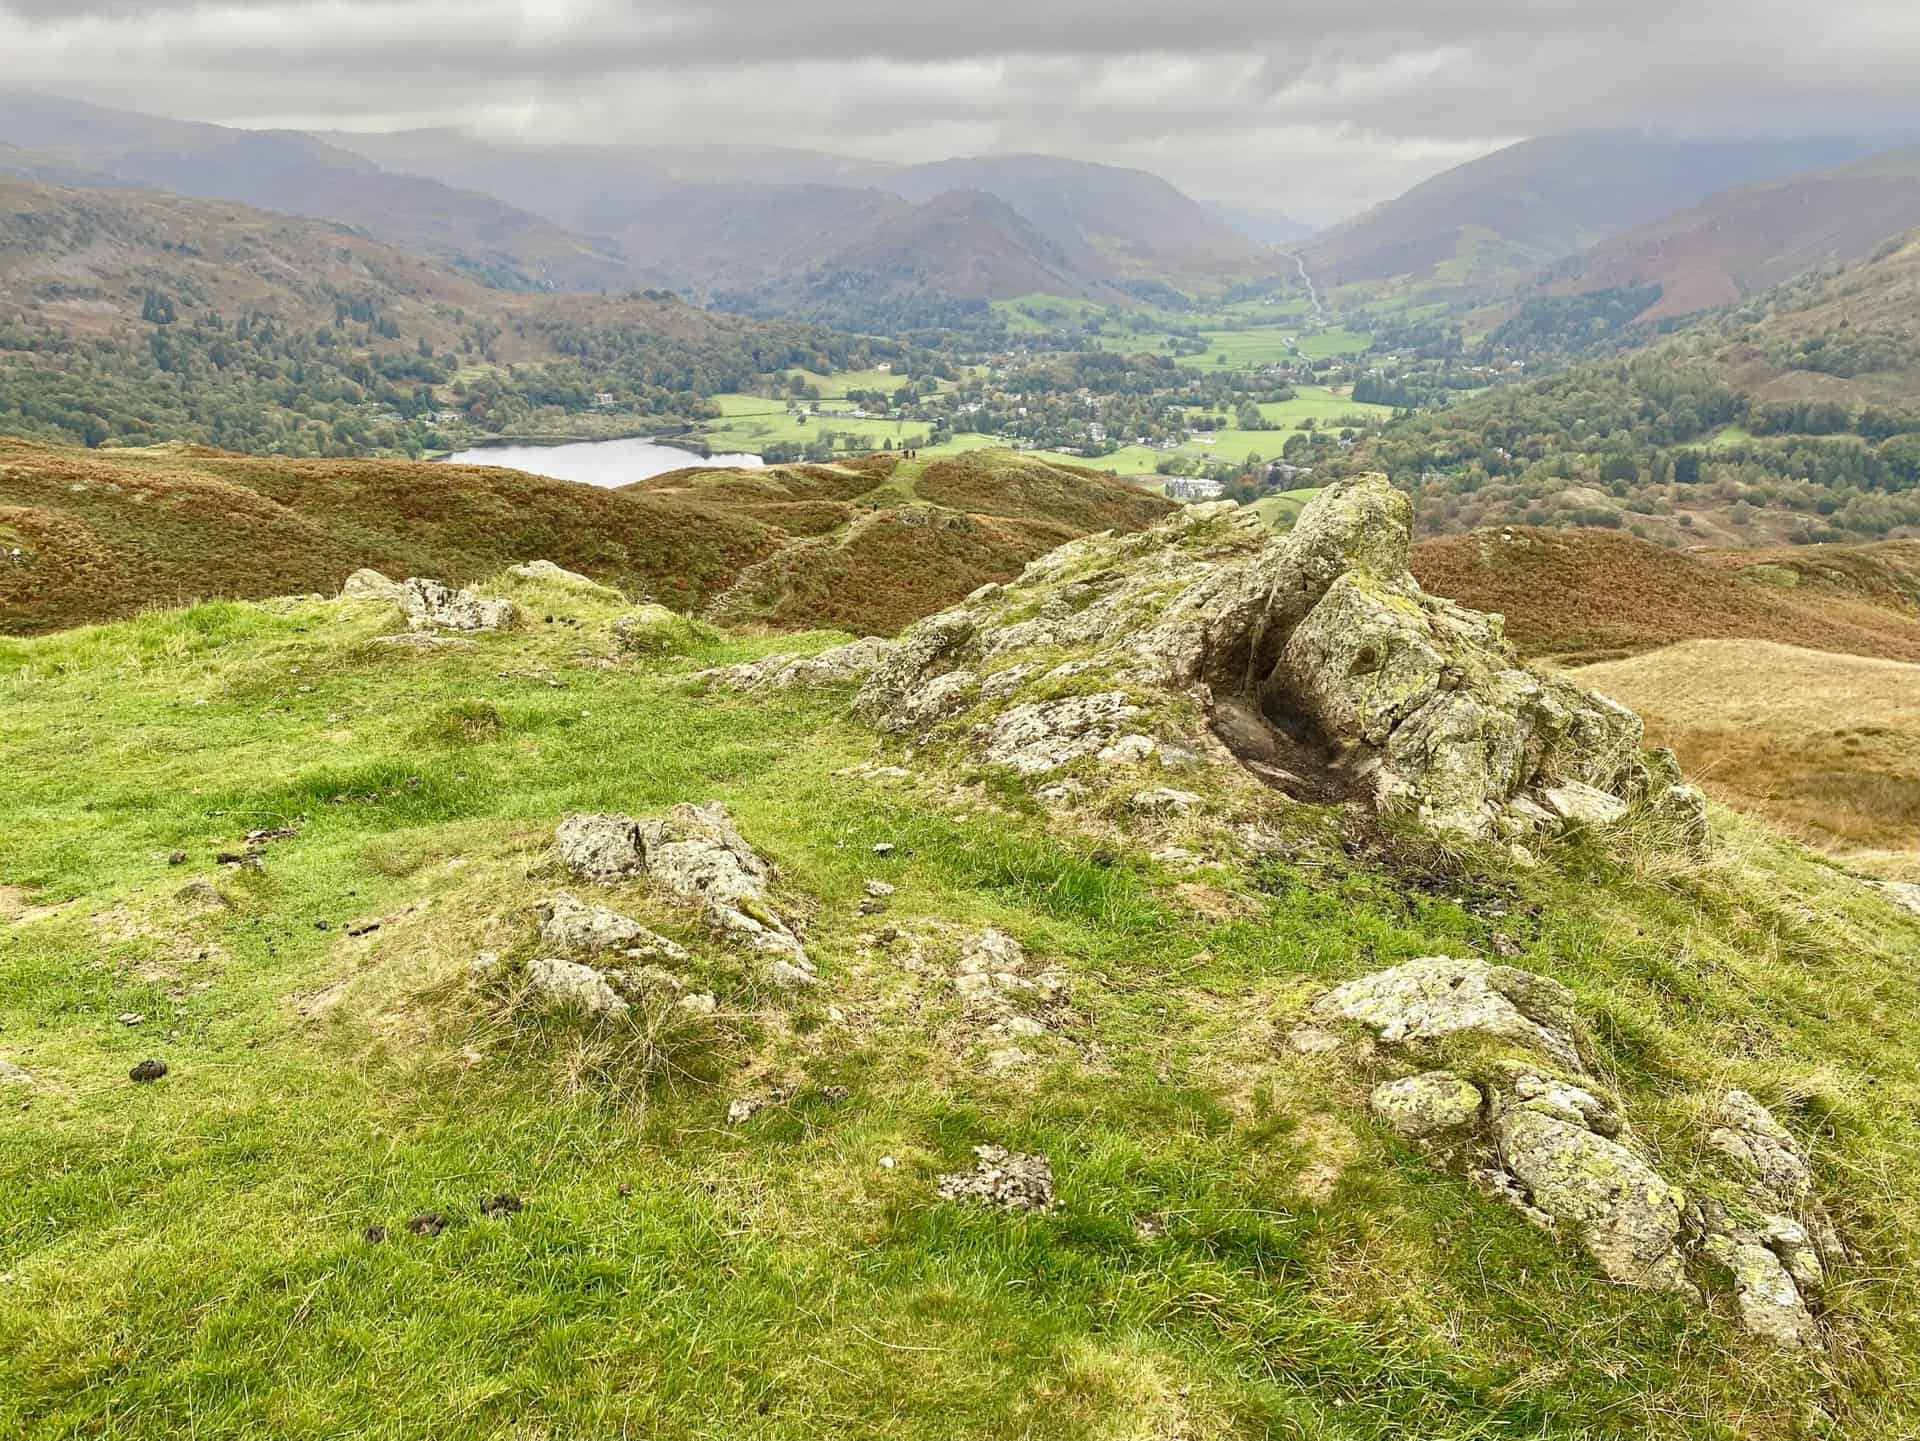 Looking over towards Elterwater (the village) and Great Langdale.